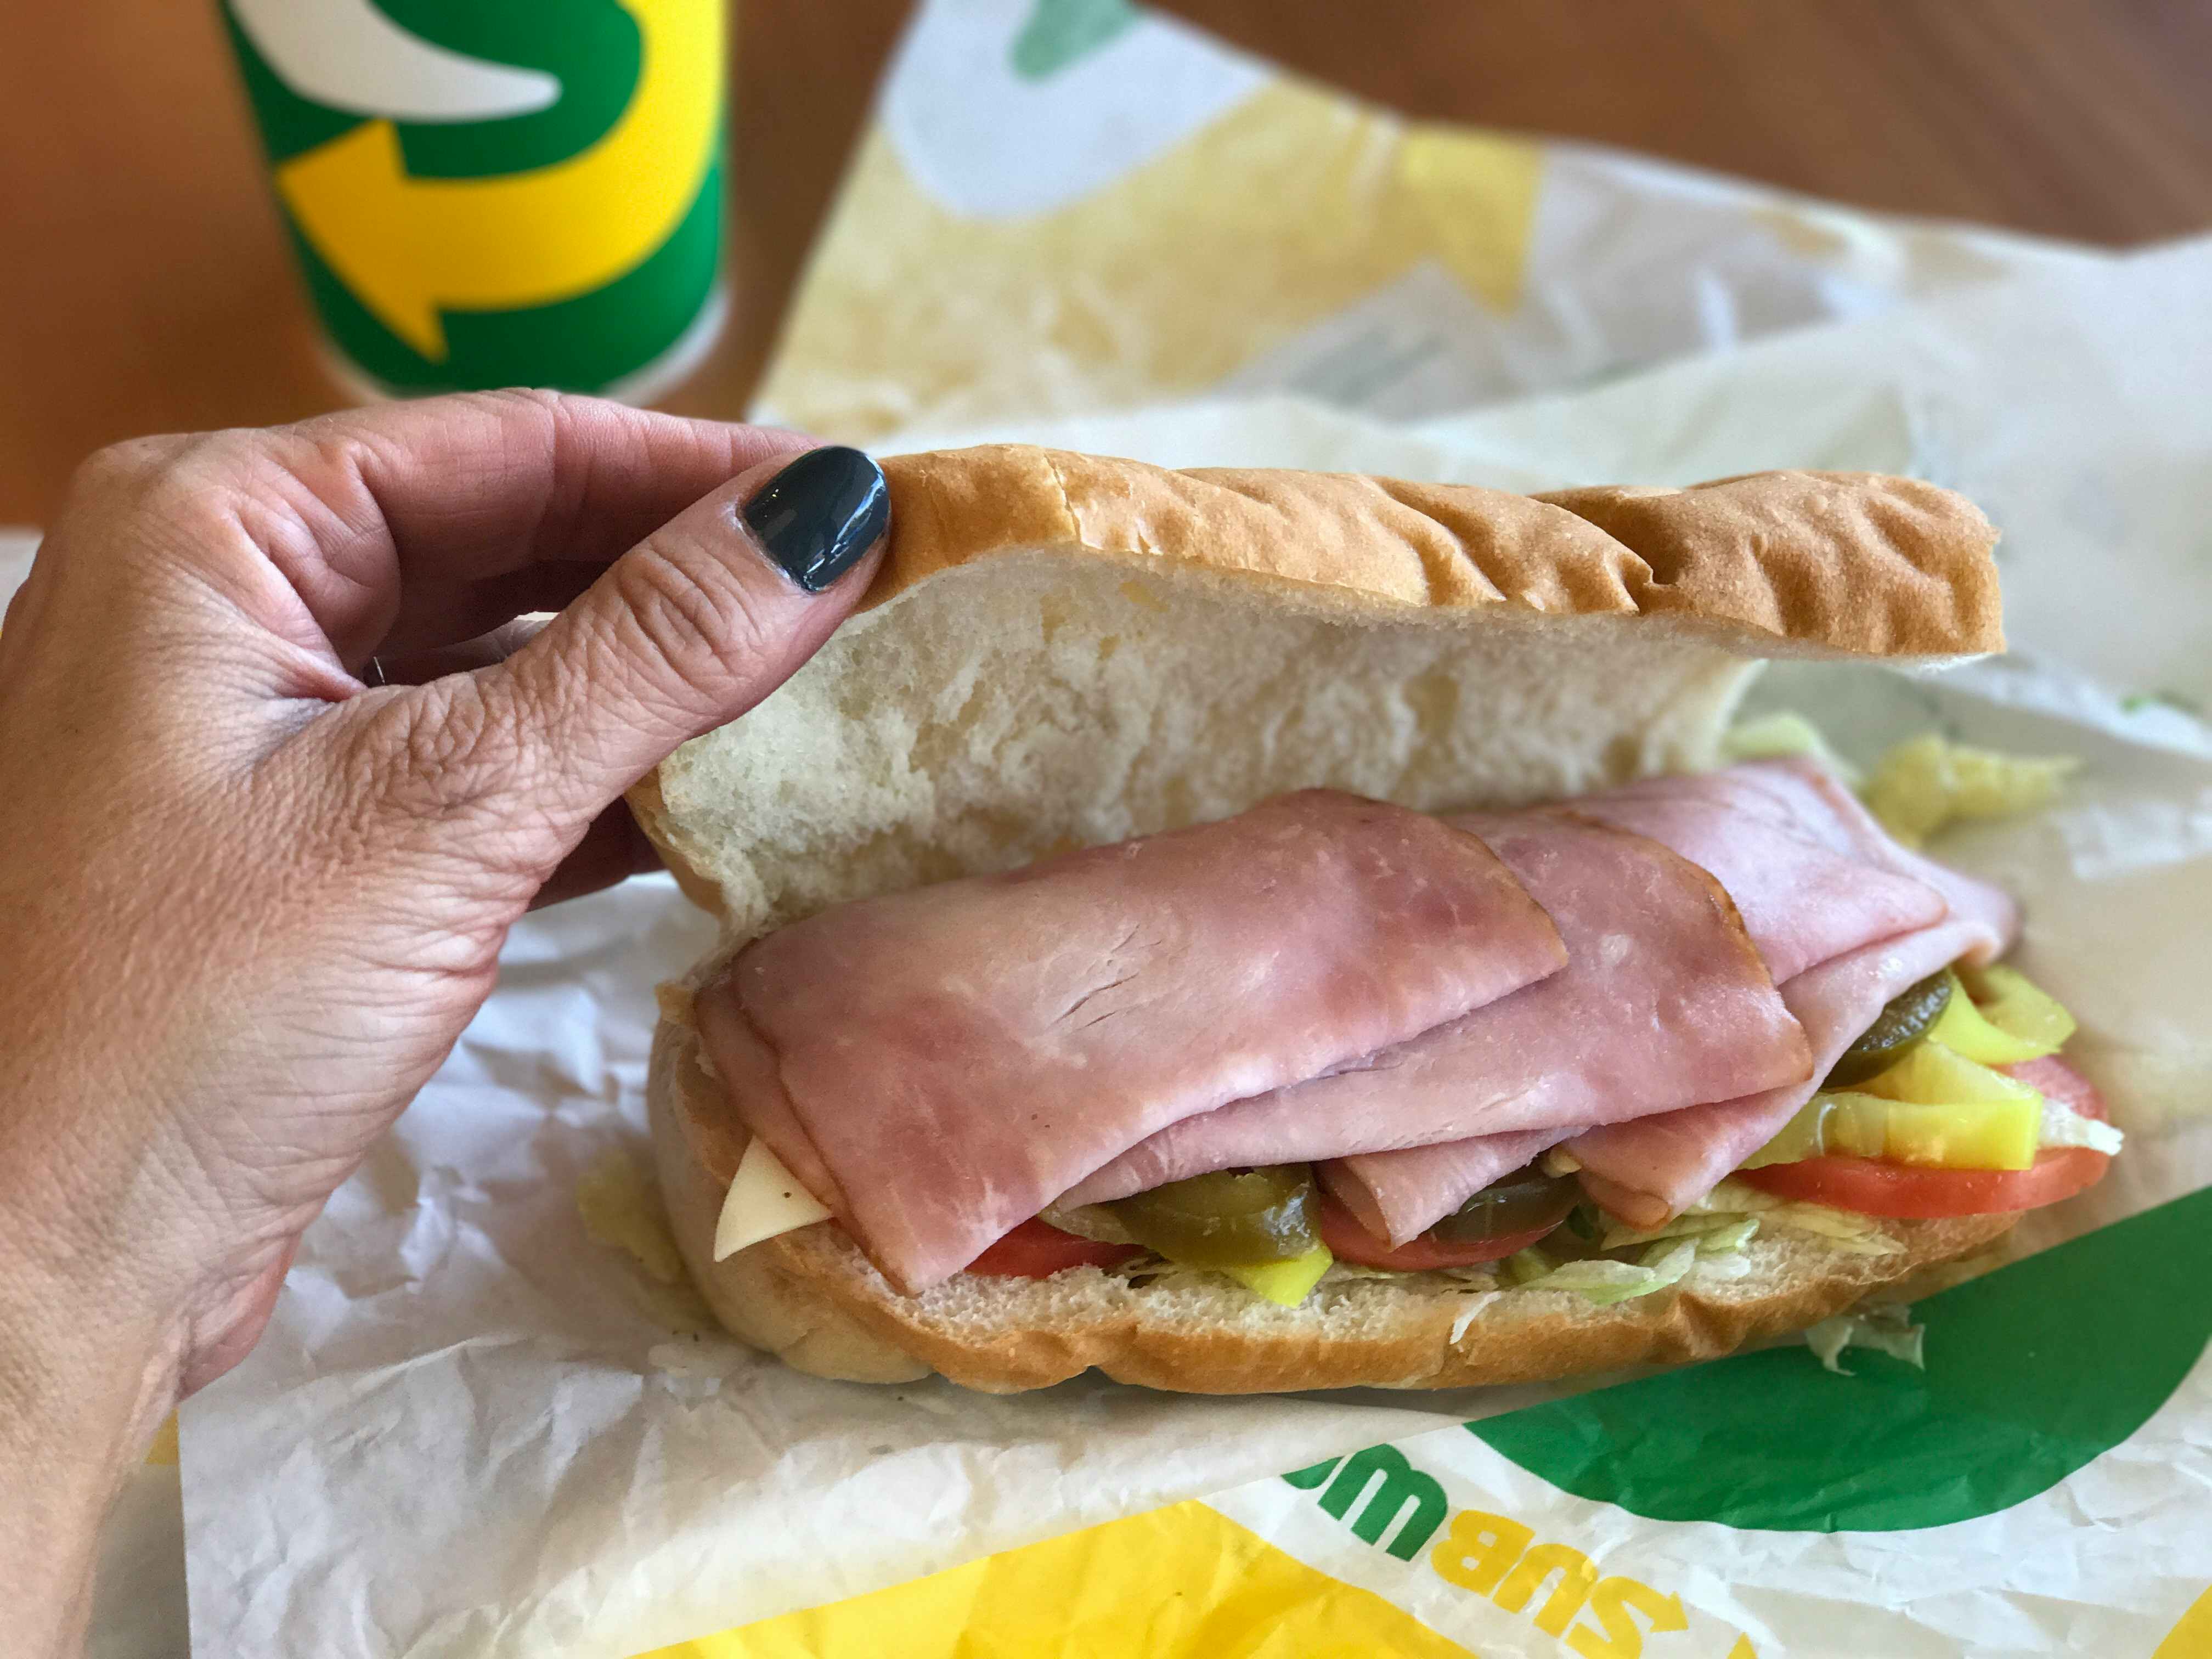 woman's hand opens a subway sub to reveal ingredients